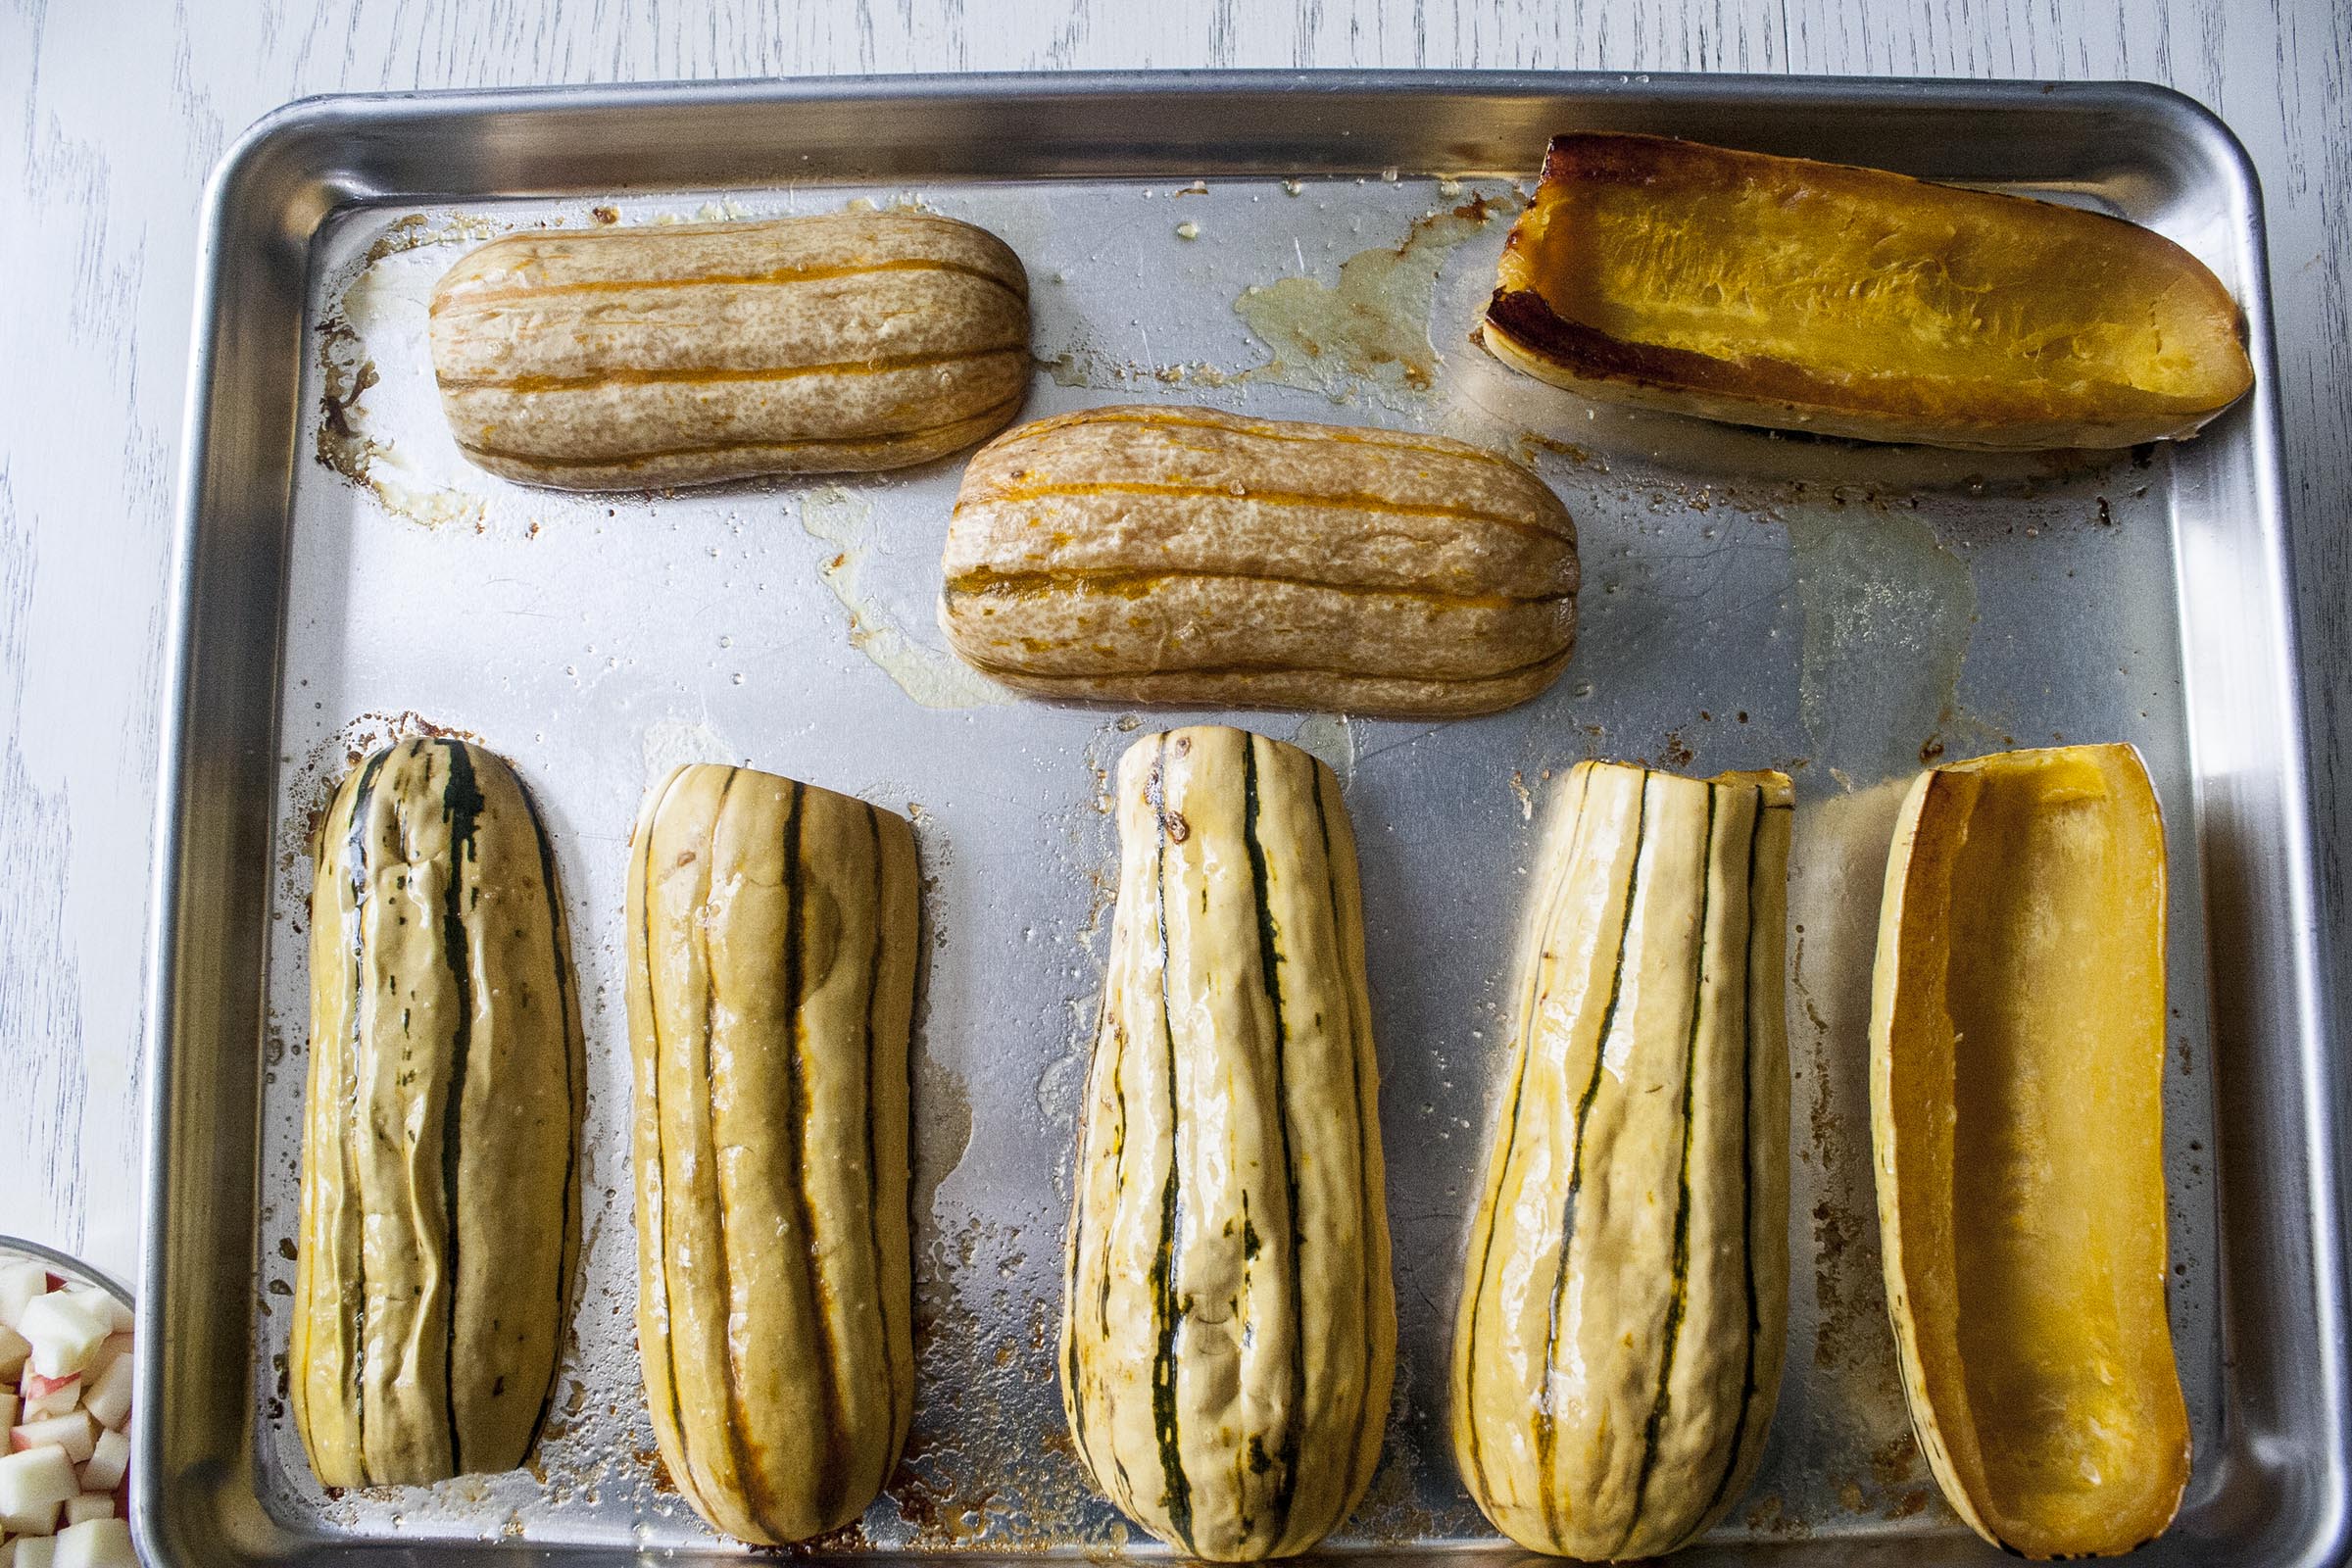 These delicata squash have been halved and roasted.